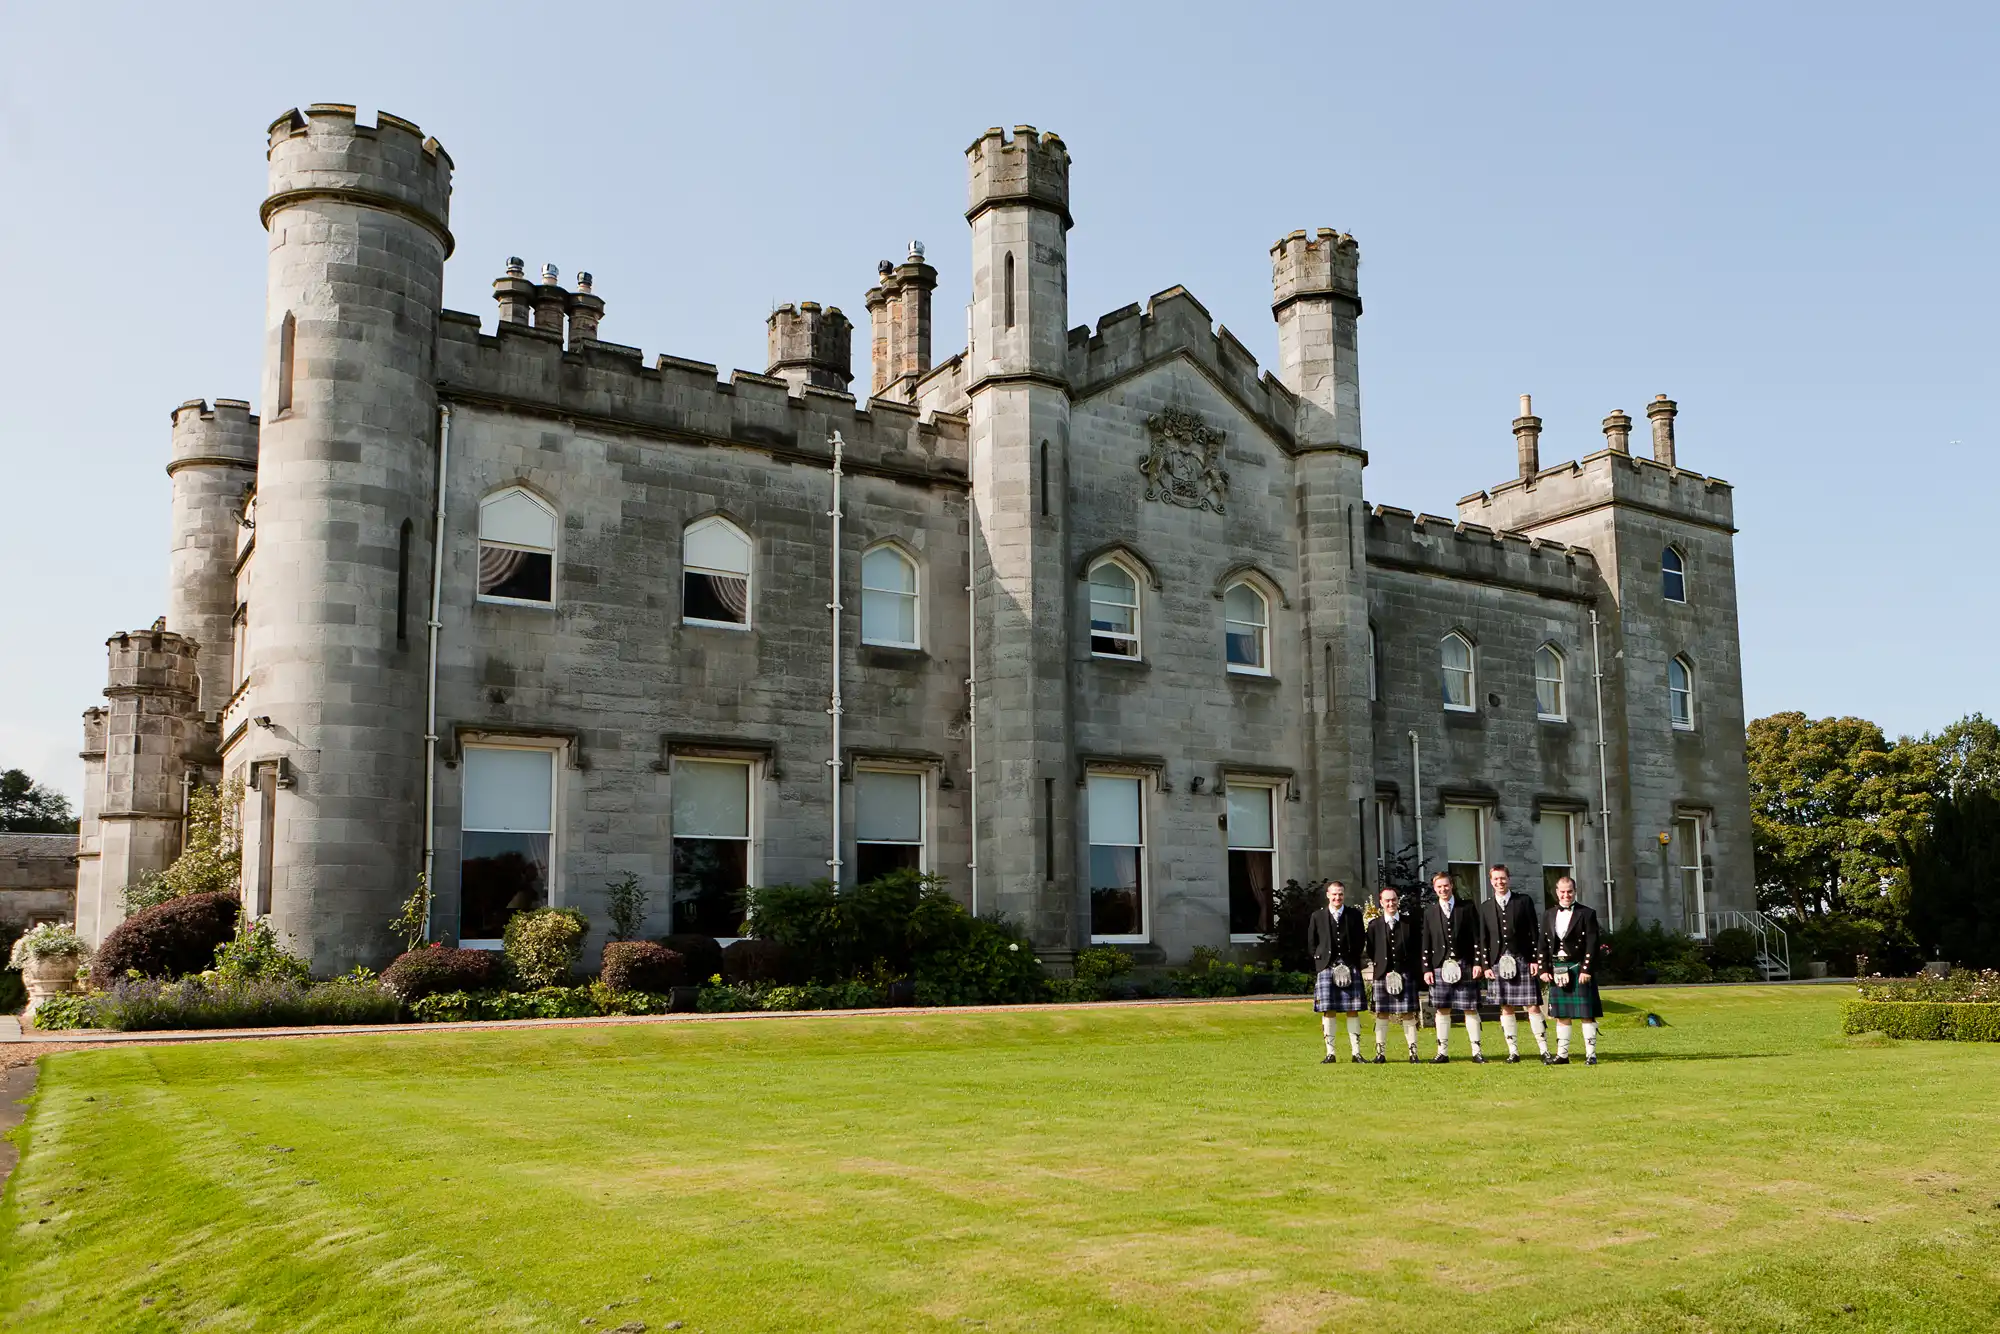 A row of seven people in traditional scottish attire standing in front of an historic stone castle with turrets under a clear sky.